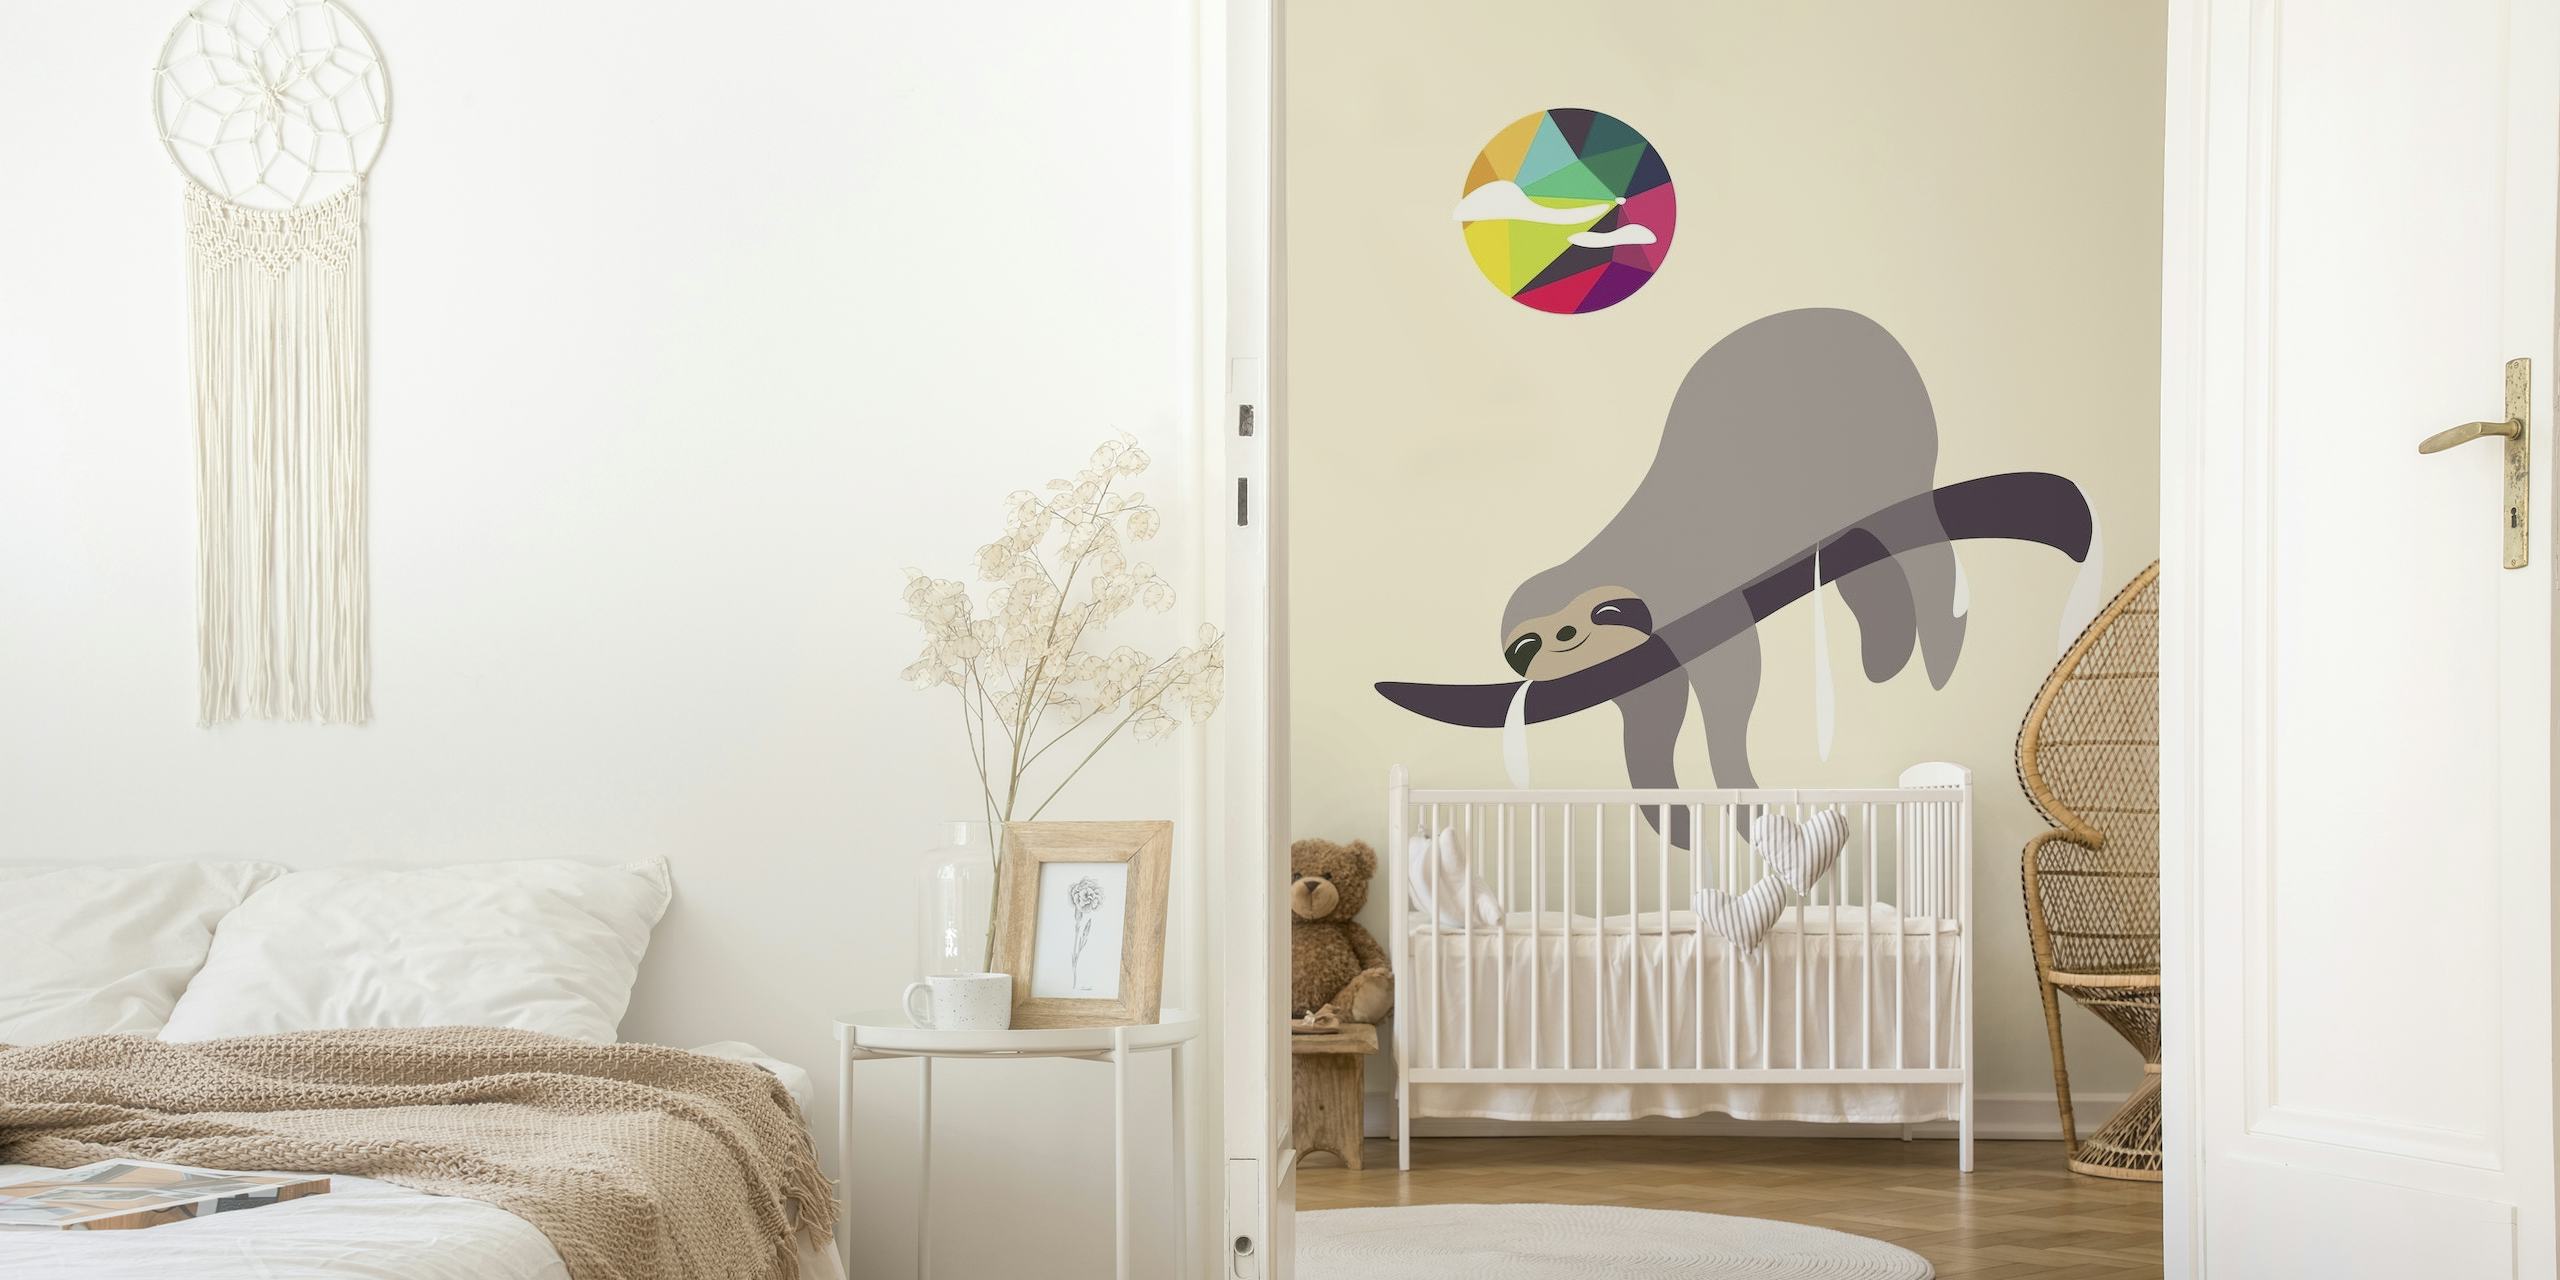 Sloth wall mural with a colorful geometric abstract sun